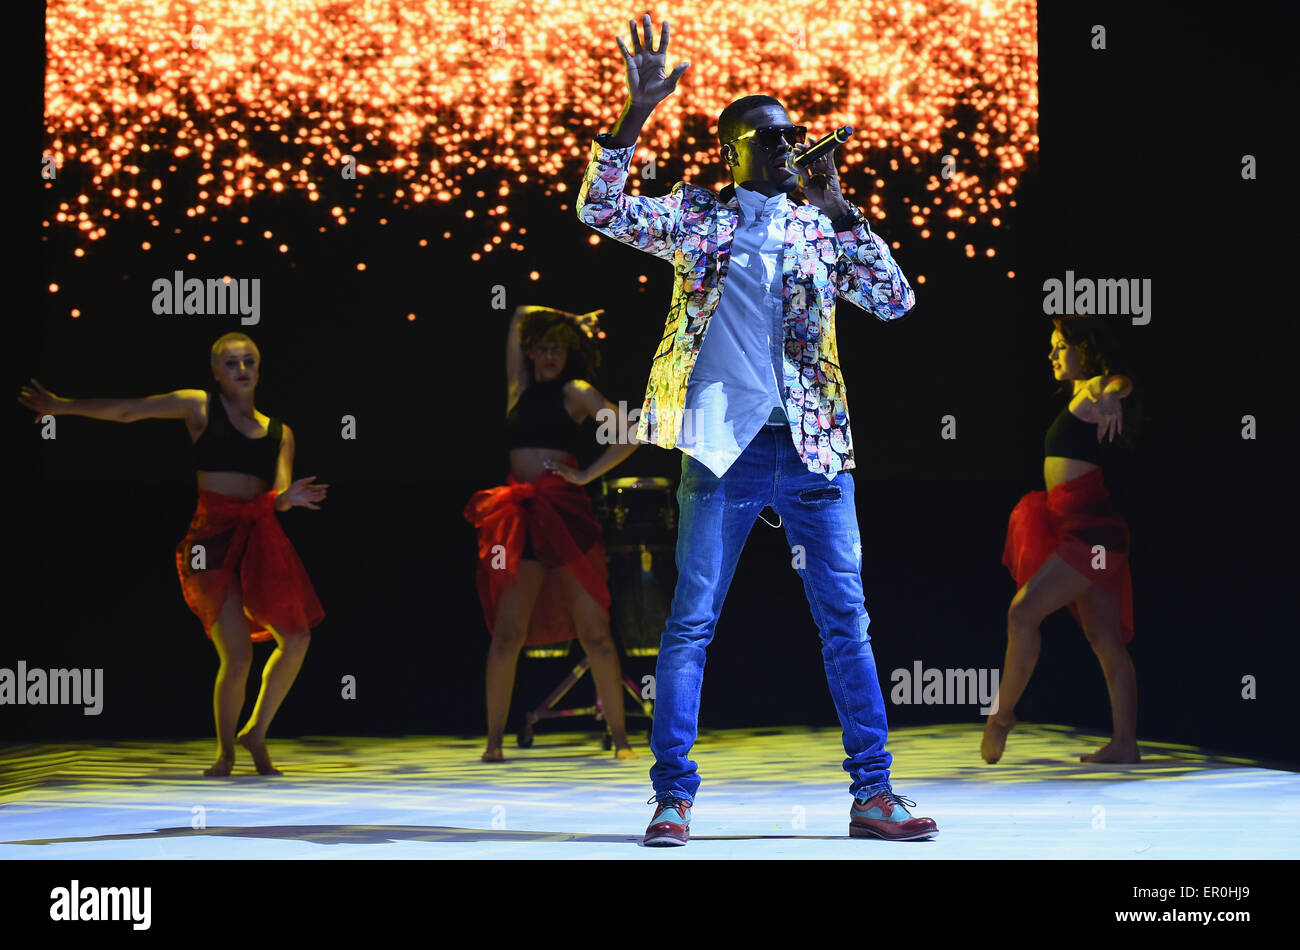 Munich, Germany. 23rd May, 2015. Singer Omi performes during the FC Bayern Muenchen Champions dinner at Postpalast on May 23, 2015 in Munich, Germany. Photo by Lars Baron/Bongarts/Getty Images/FC Bayern/dpa (Editorial use only) Credit:  dpa/Alamy Live News Stock Photo